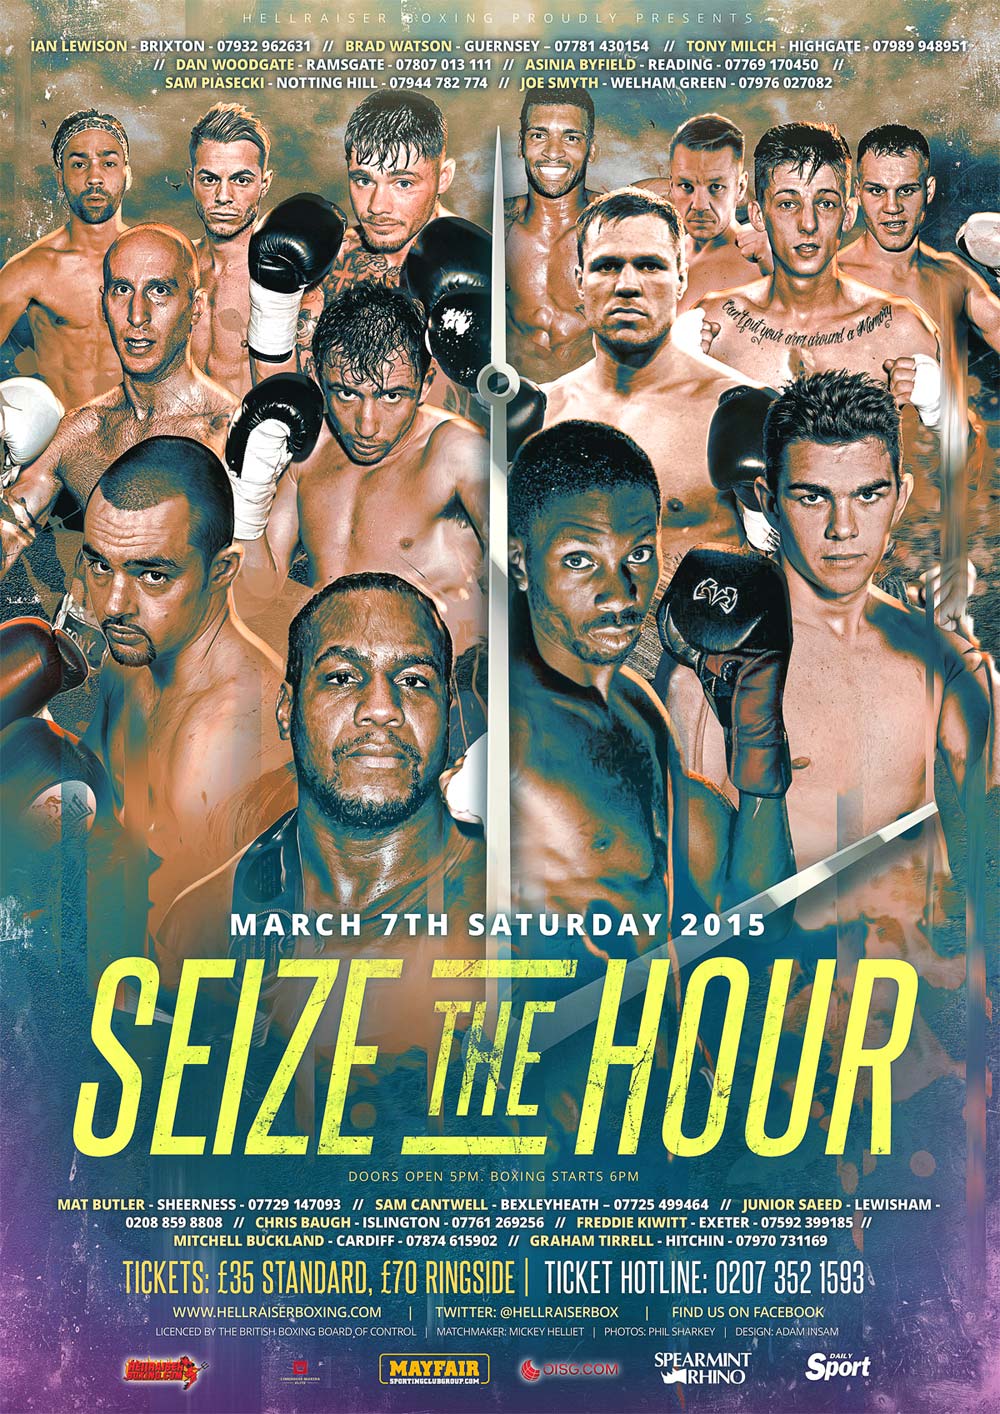 seize the hour at the camden centre